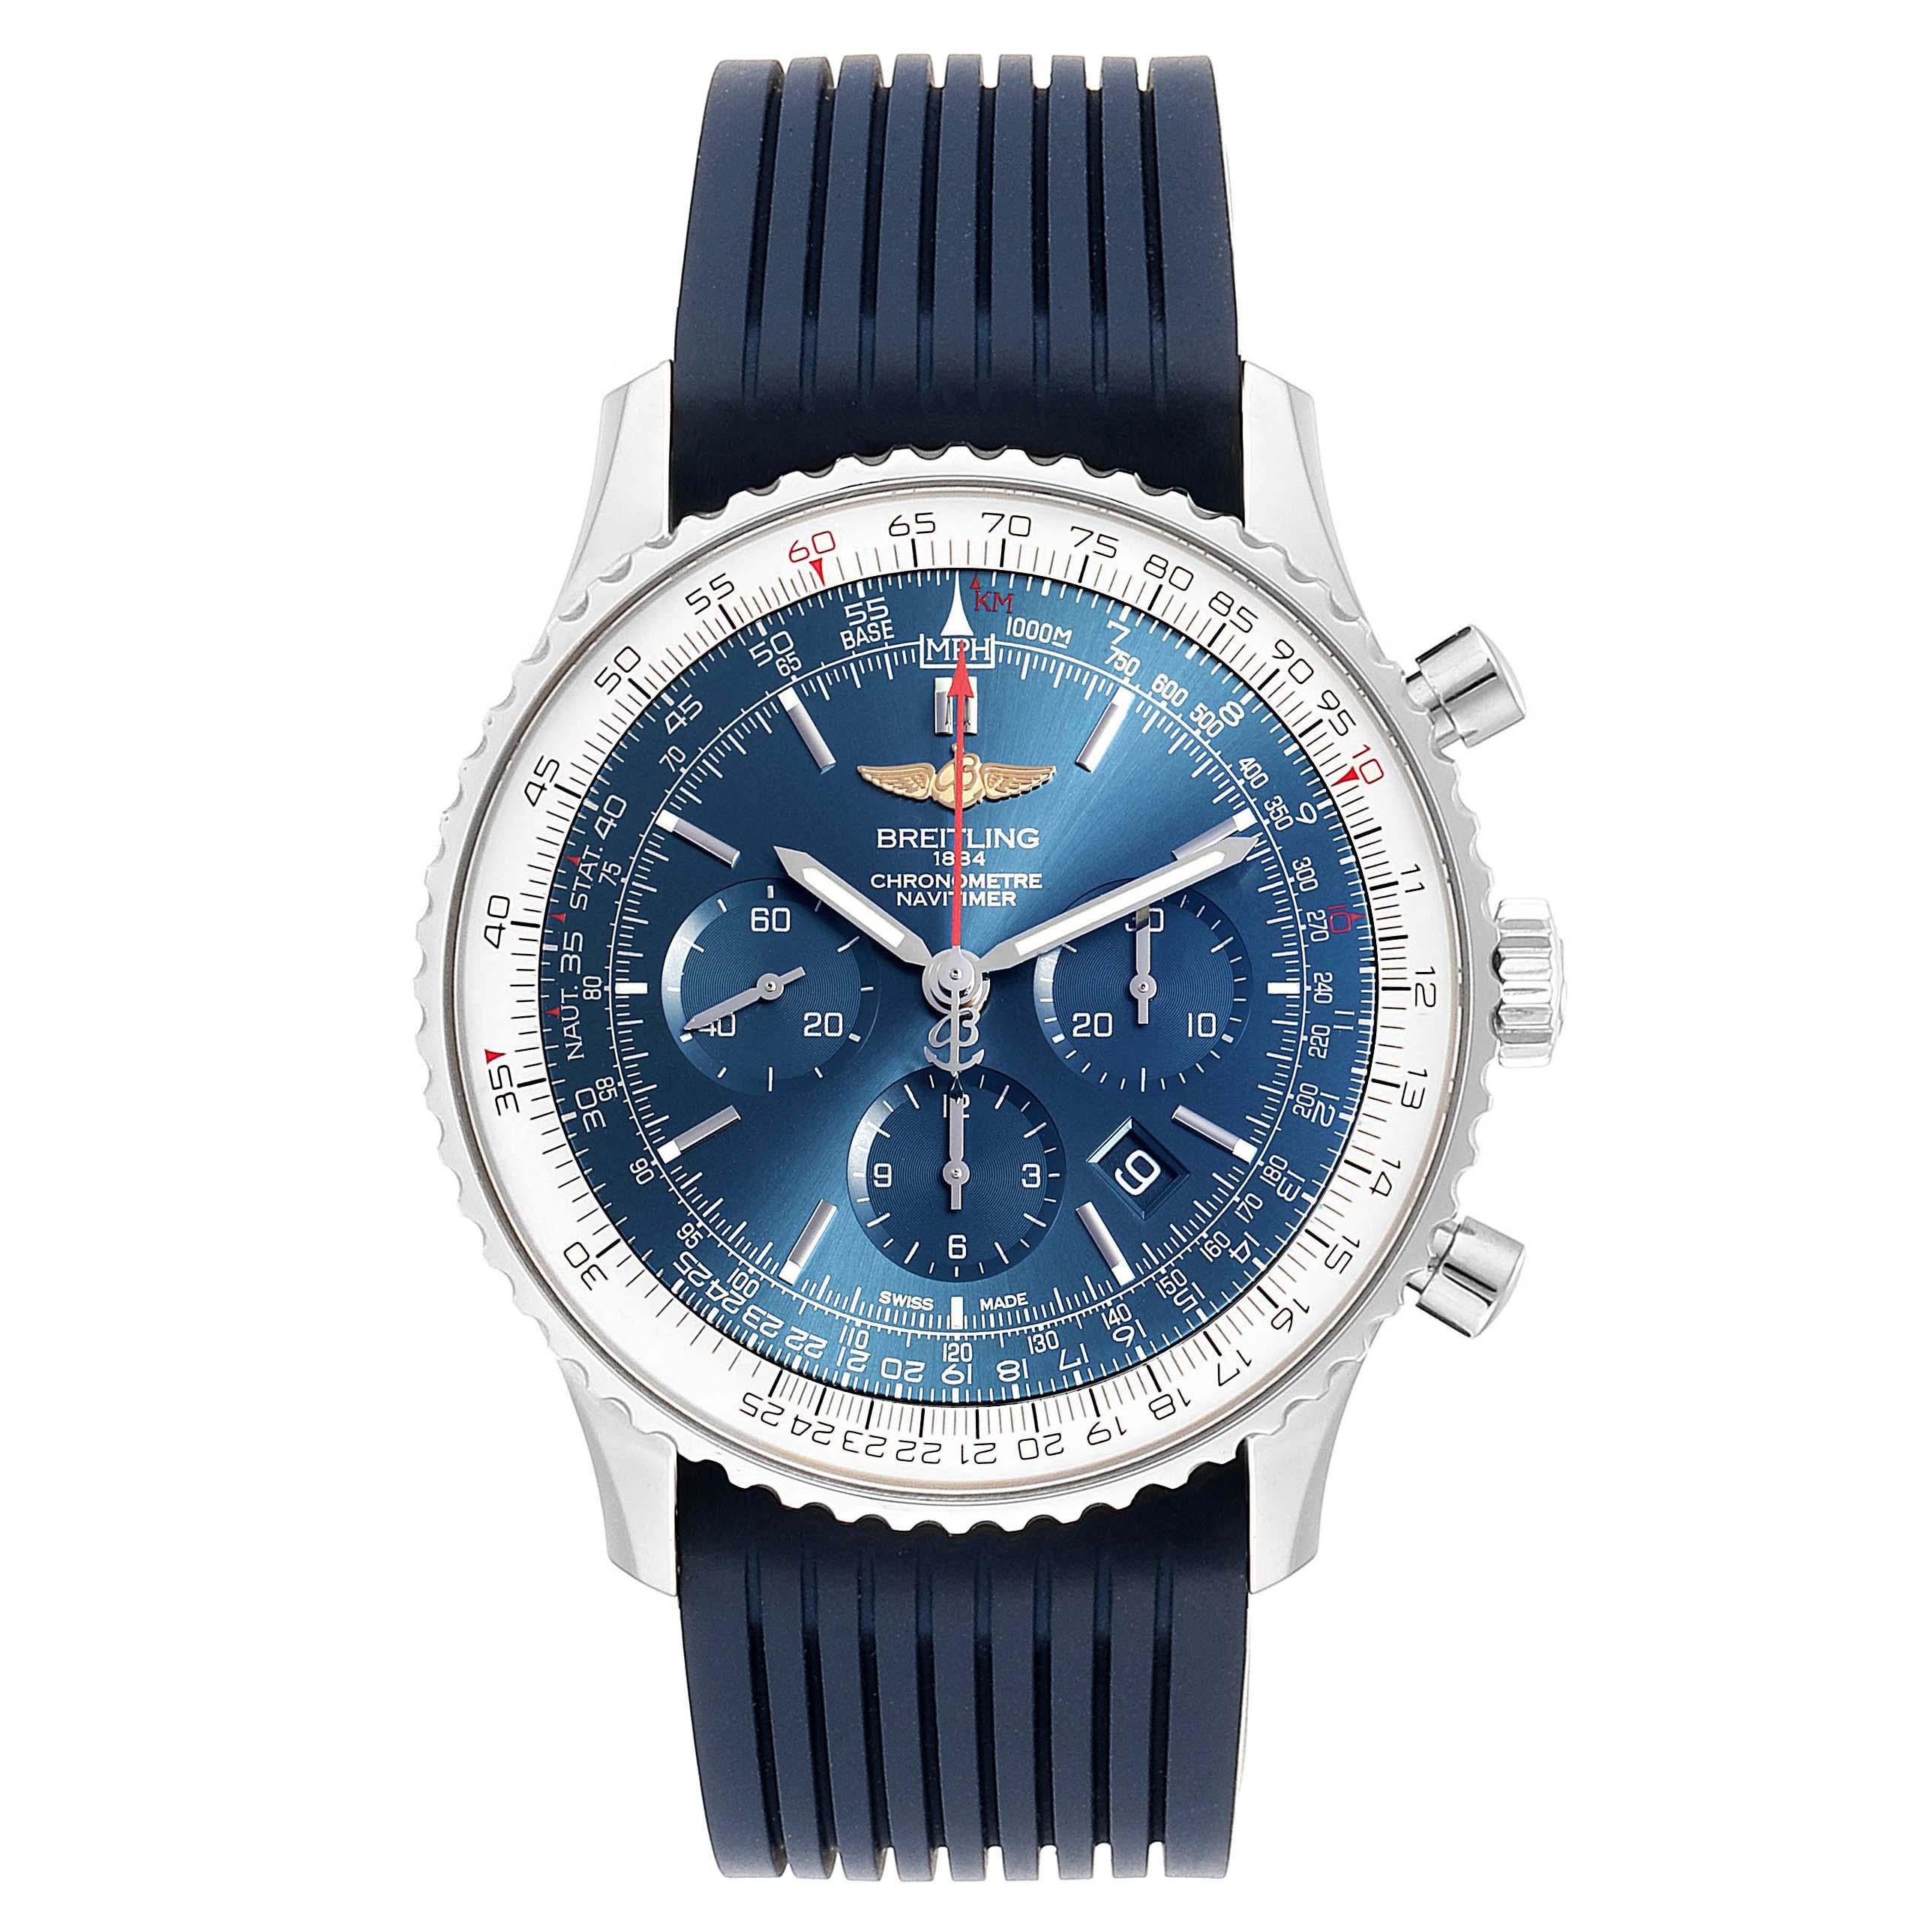 Breitling Navitimer 01 46 Blue Dial Exclusive Edition Watch AB0127 Box Card. Self-winding automatic officially certified chronometer movement. Chronograph function. Stainless steel case 46.0 mm in diameter. Case thickness 14.50 mm. Transparrent